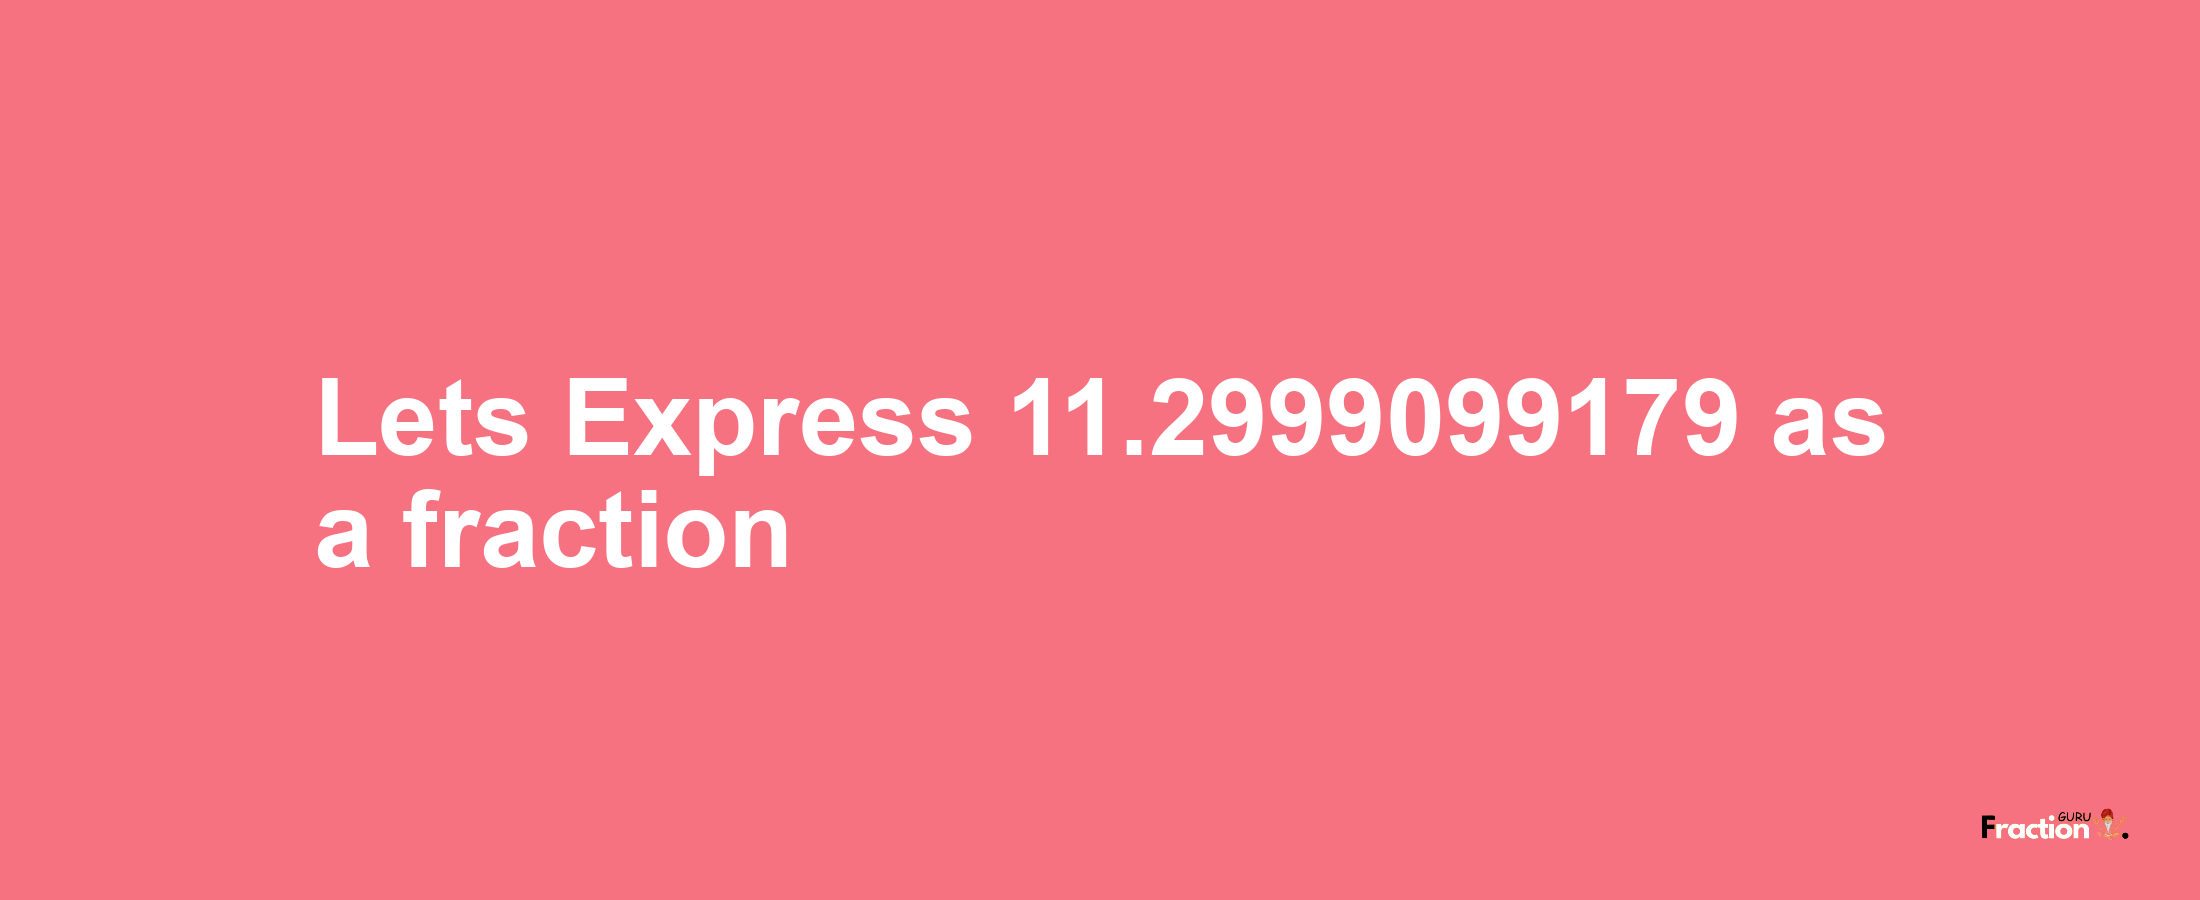 Lets Express 11.2999099179 as afraction